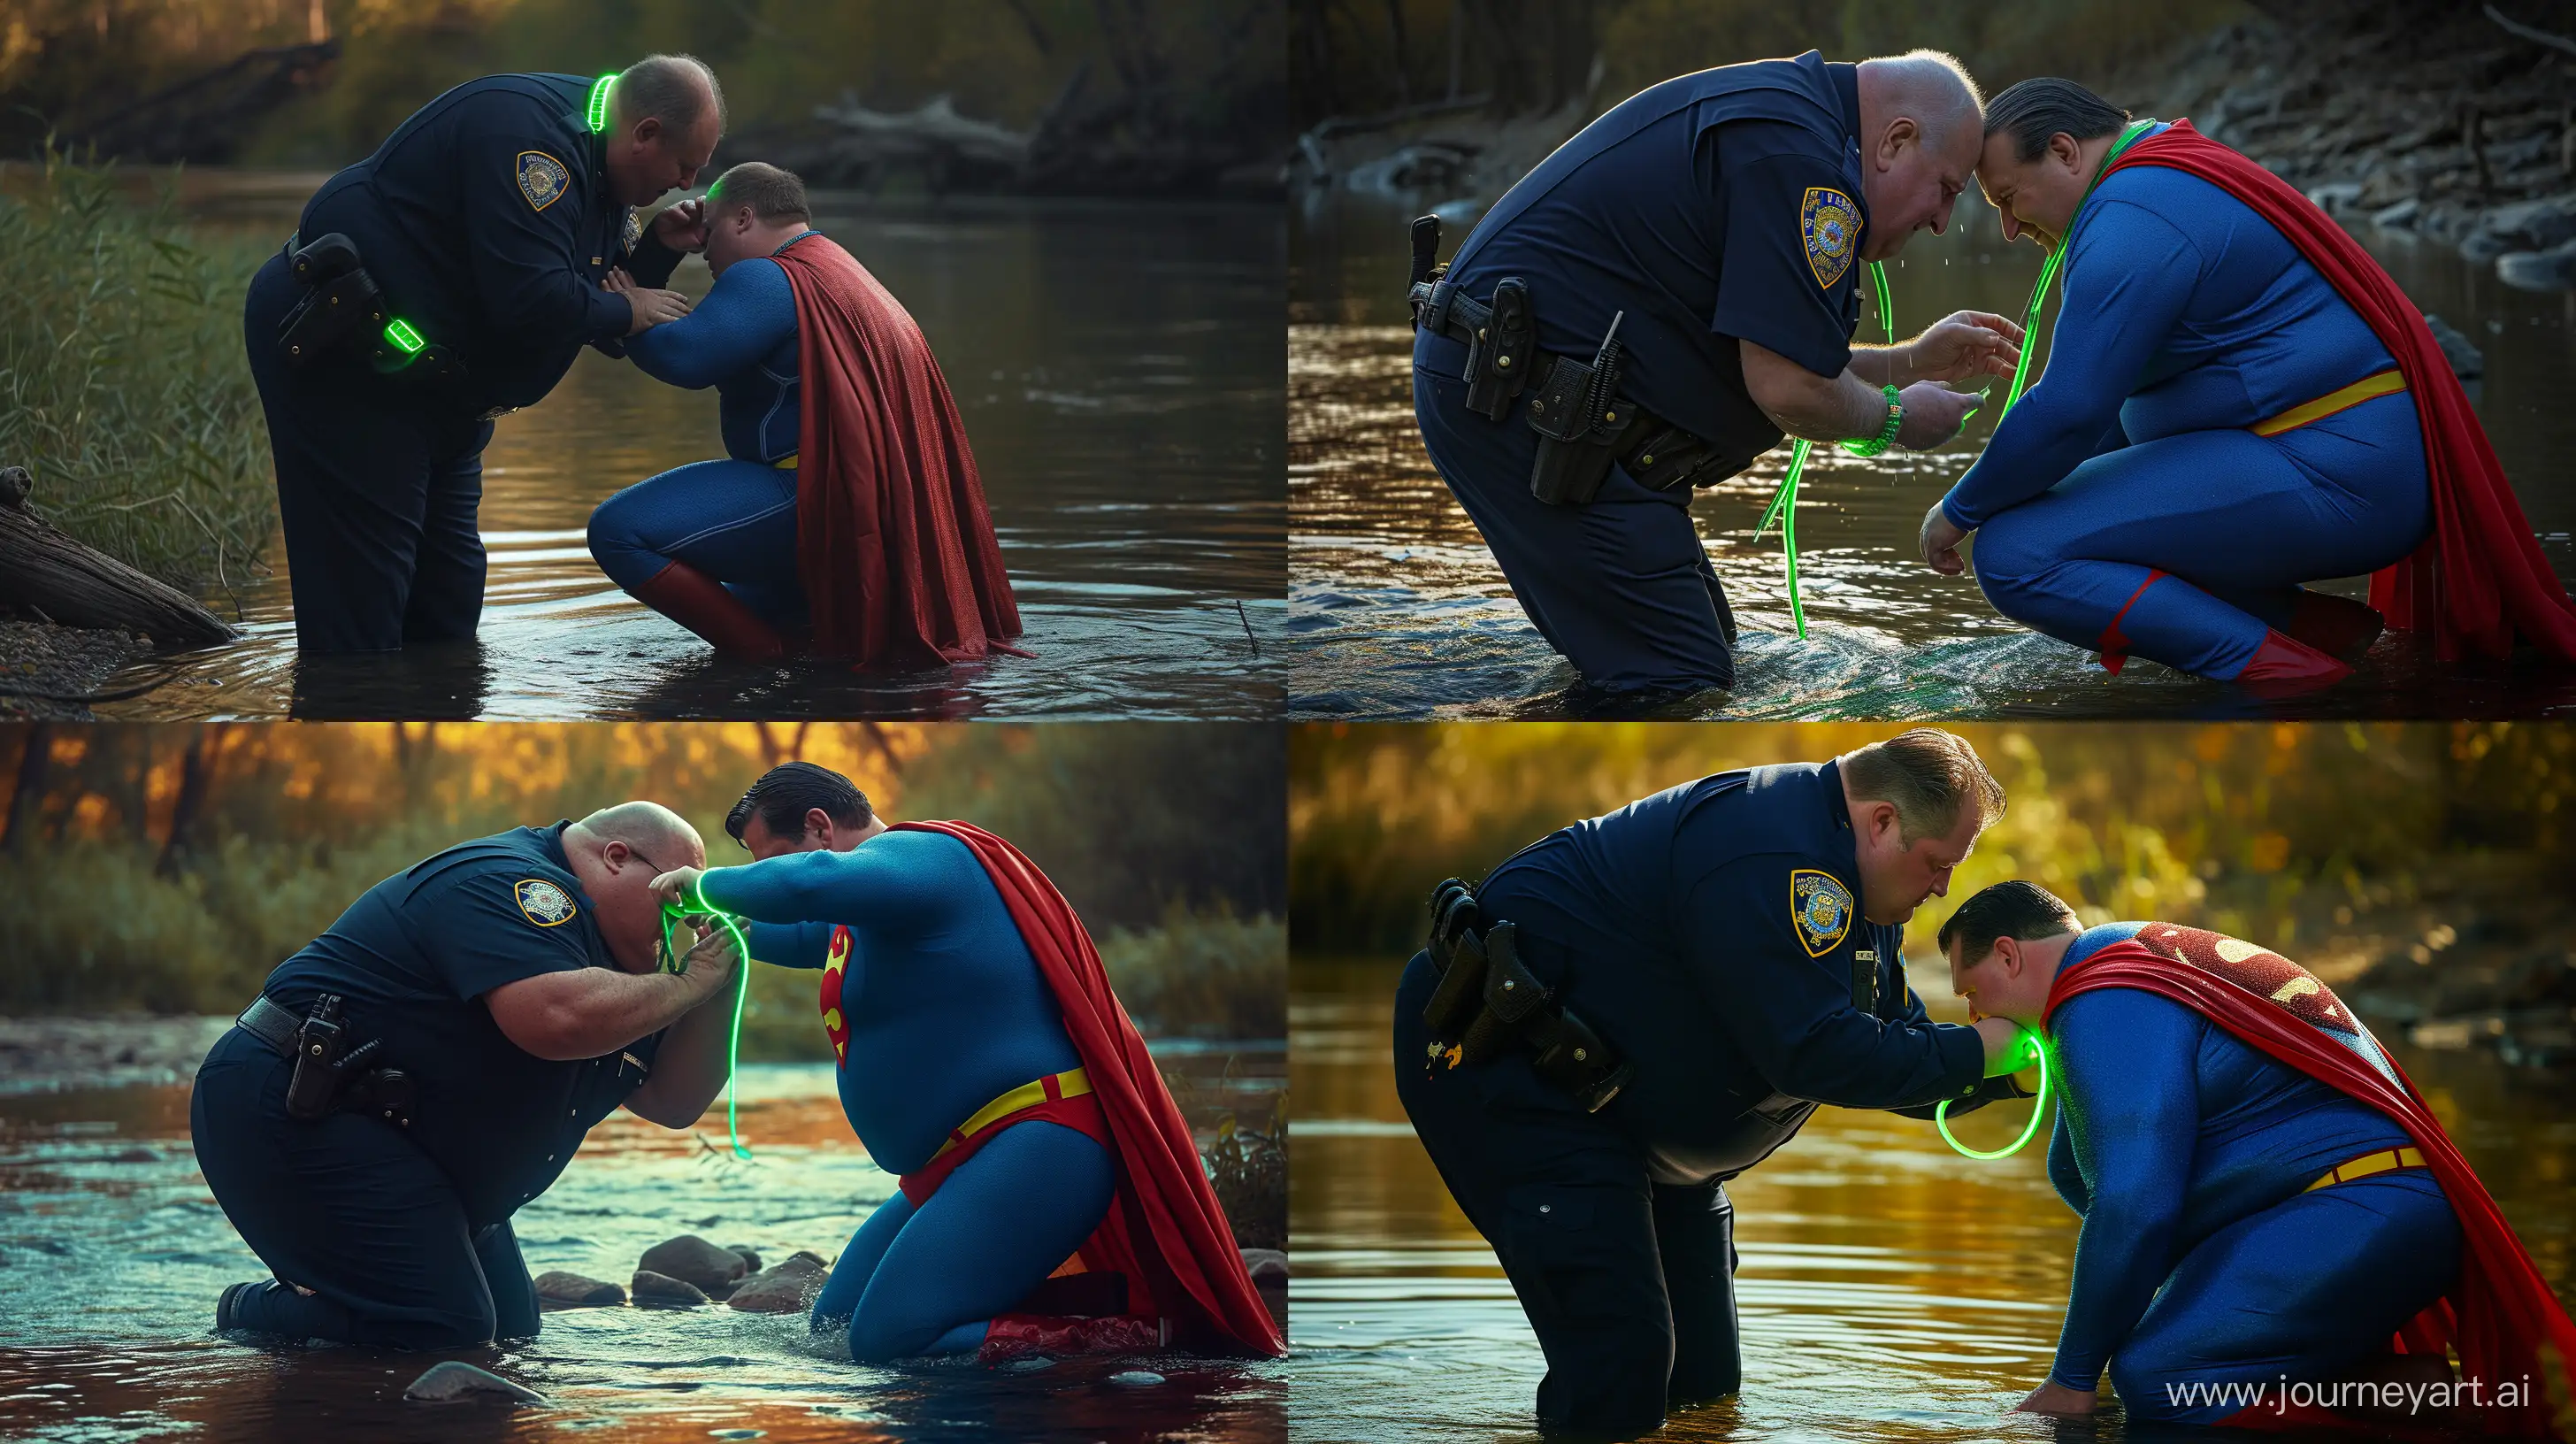 Senior-Policeman-Blesses-Vintage-Superman-with-Green-Neon-Collar-by-the-River